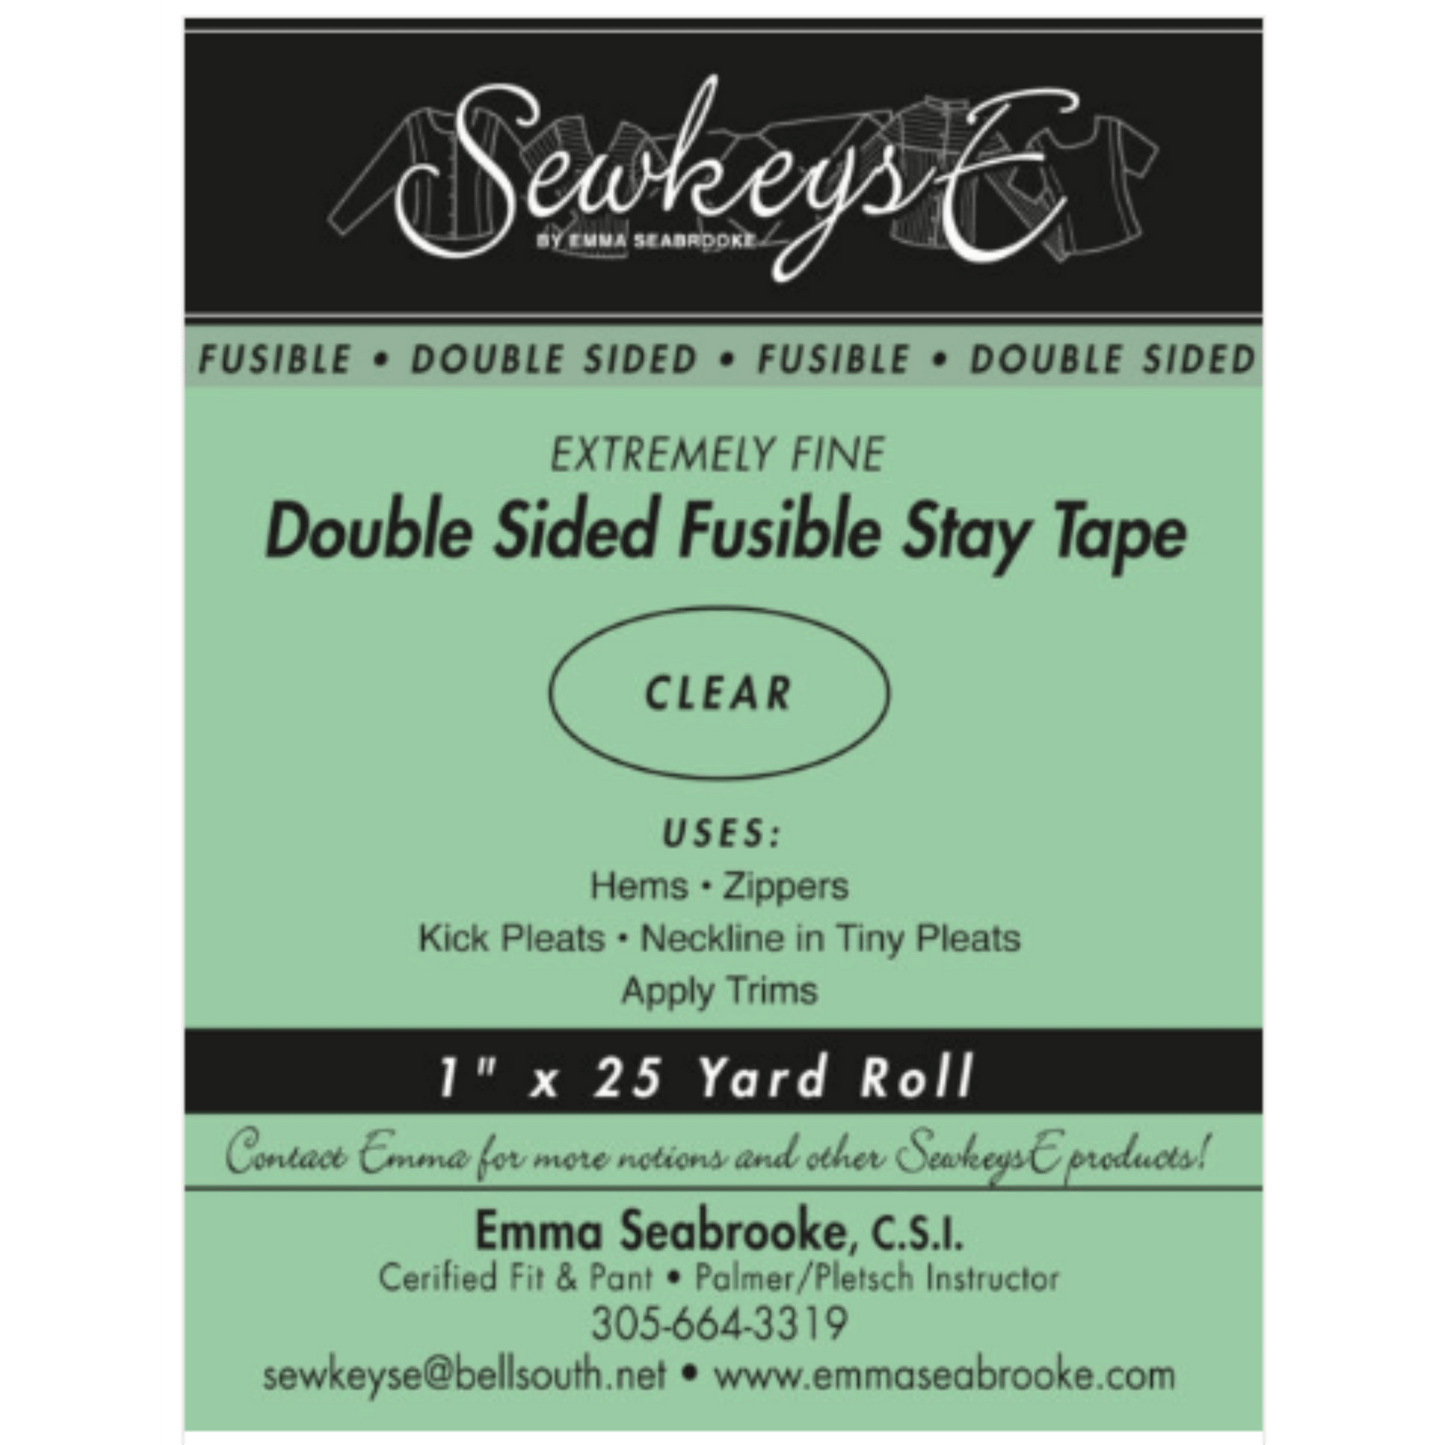 Double Sided Fusible Stay Tape